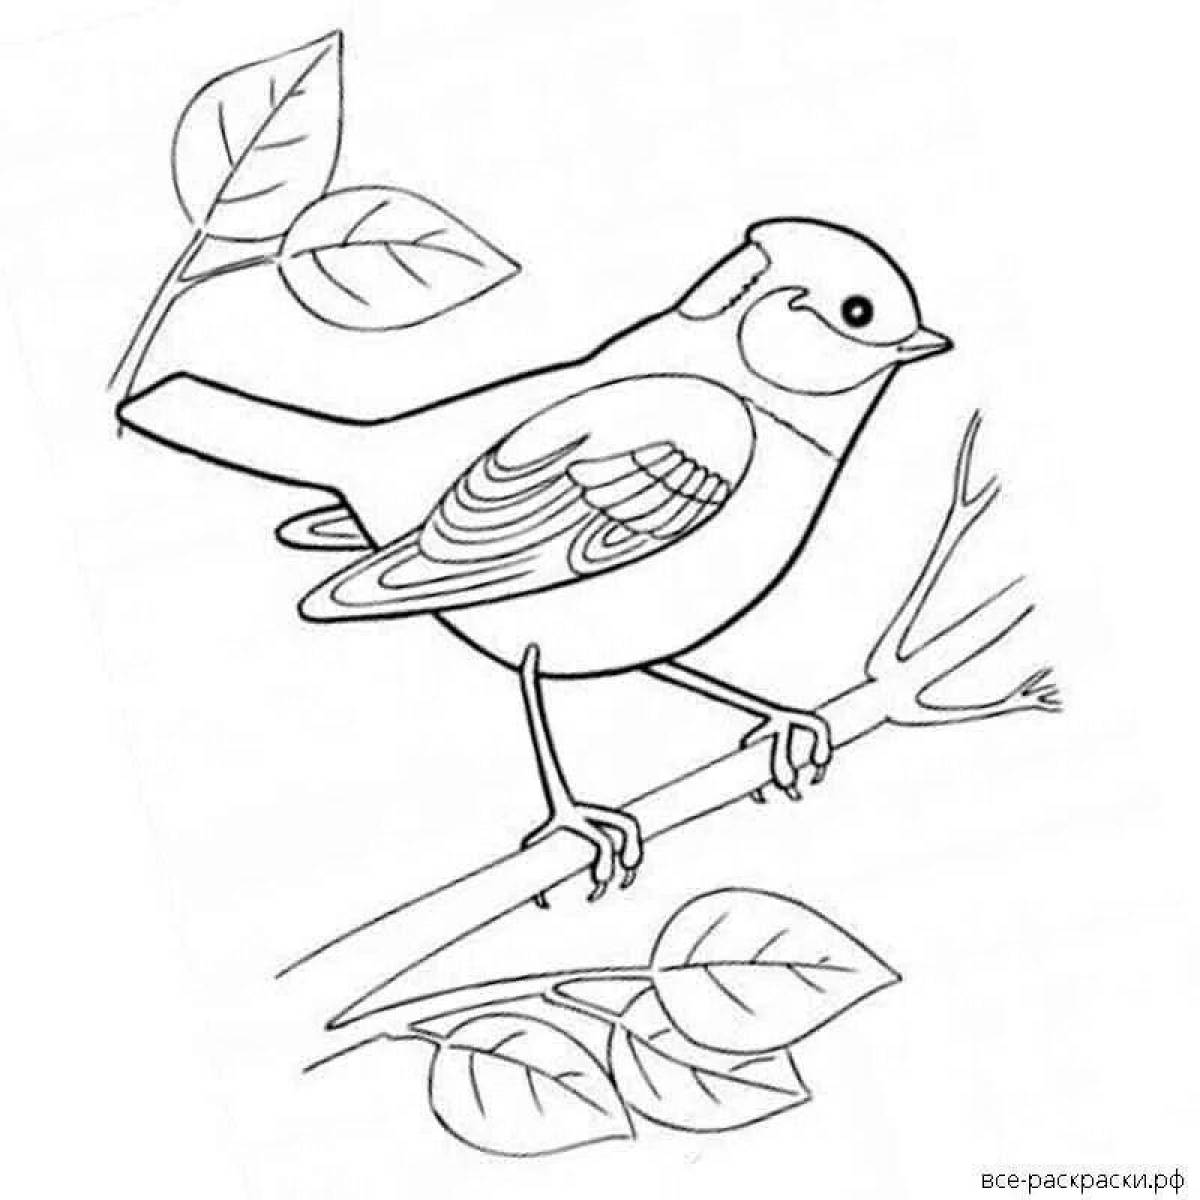 Titmouse on a branch #7